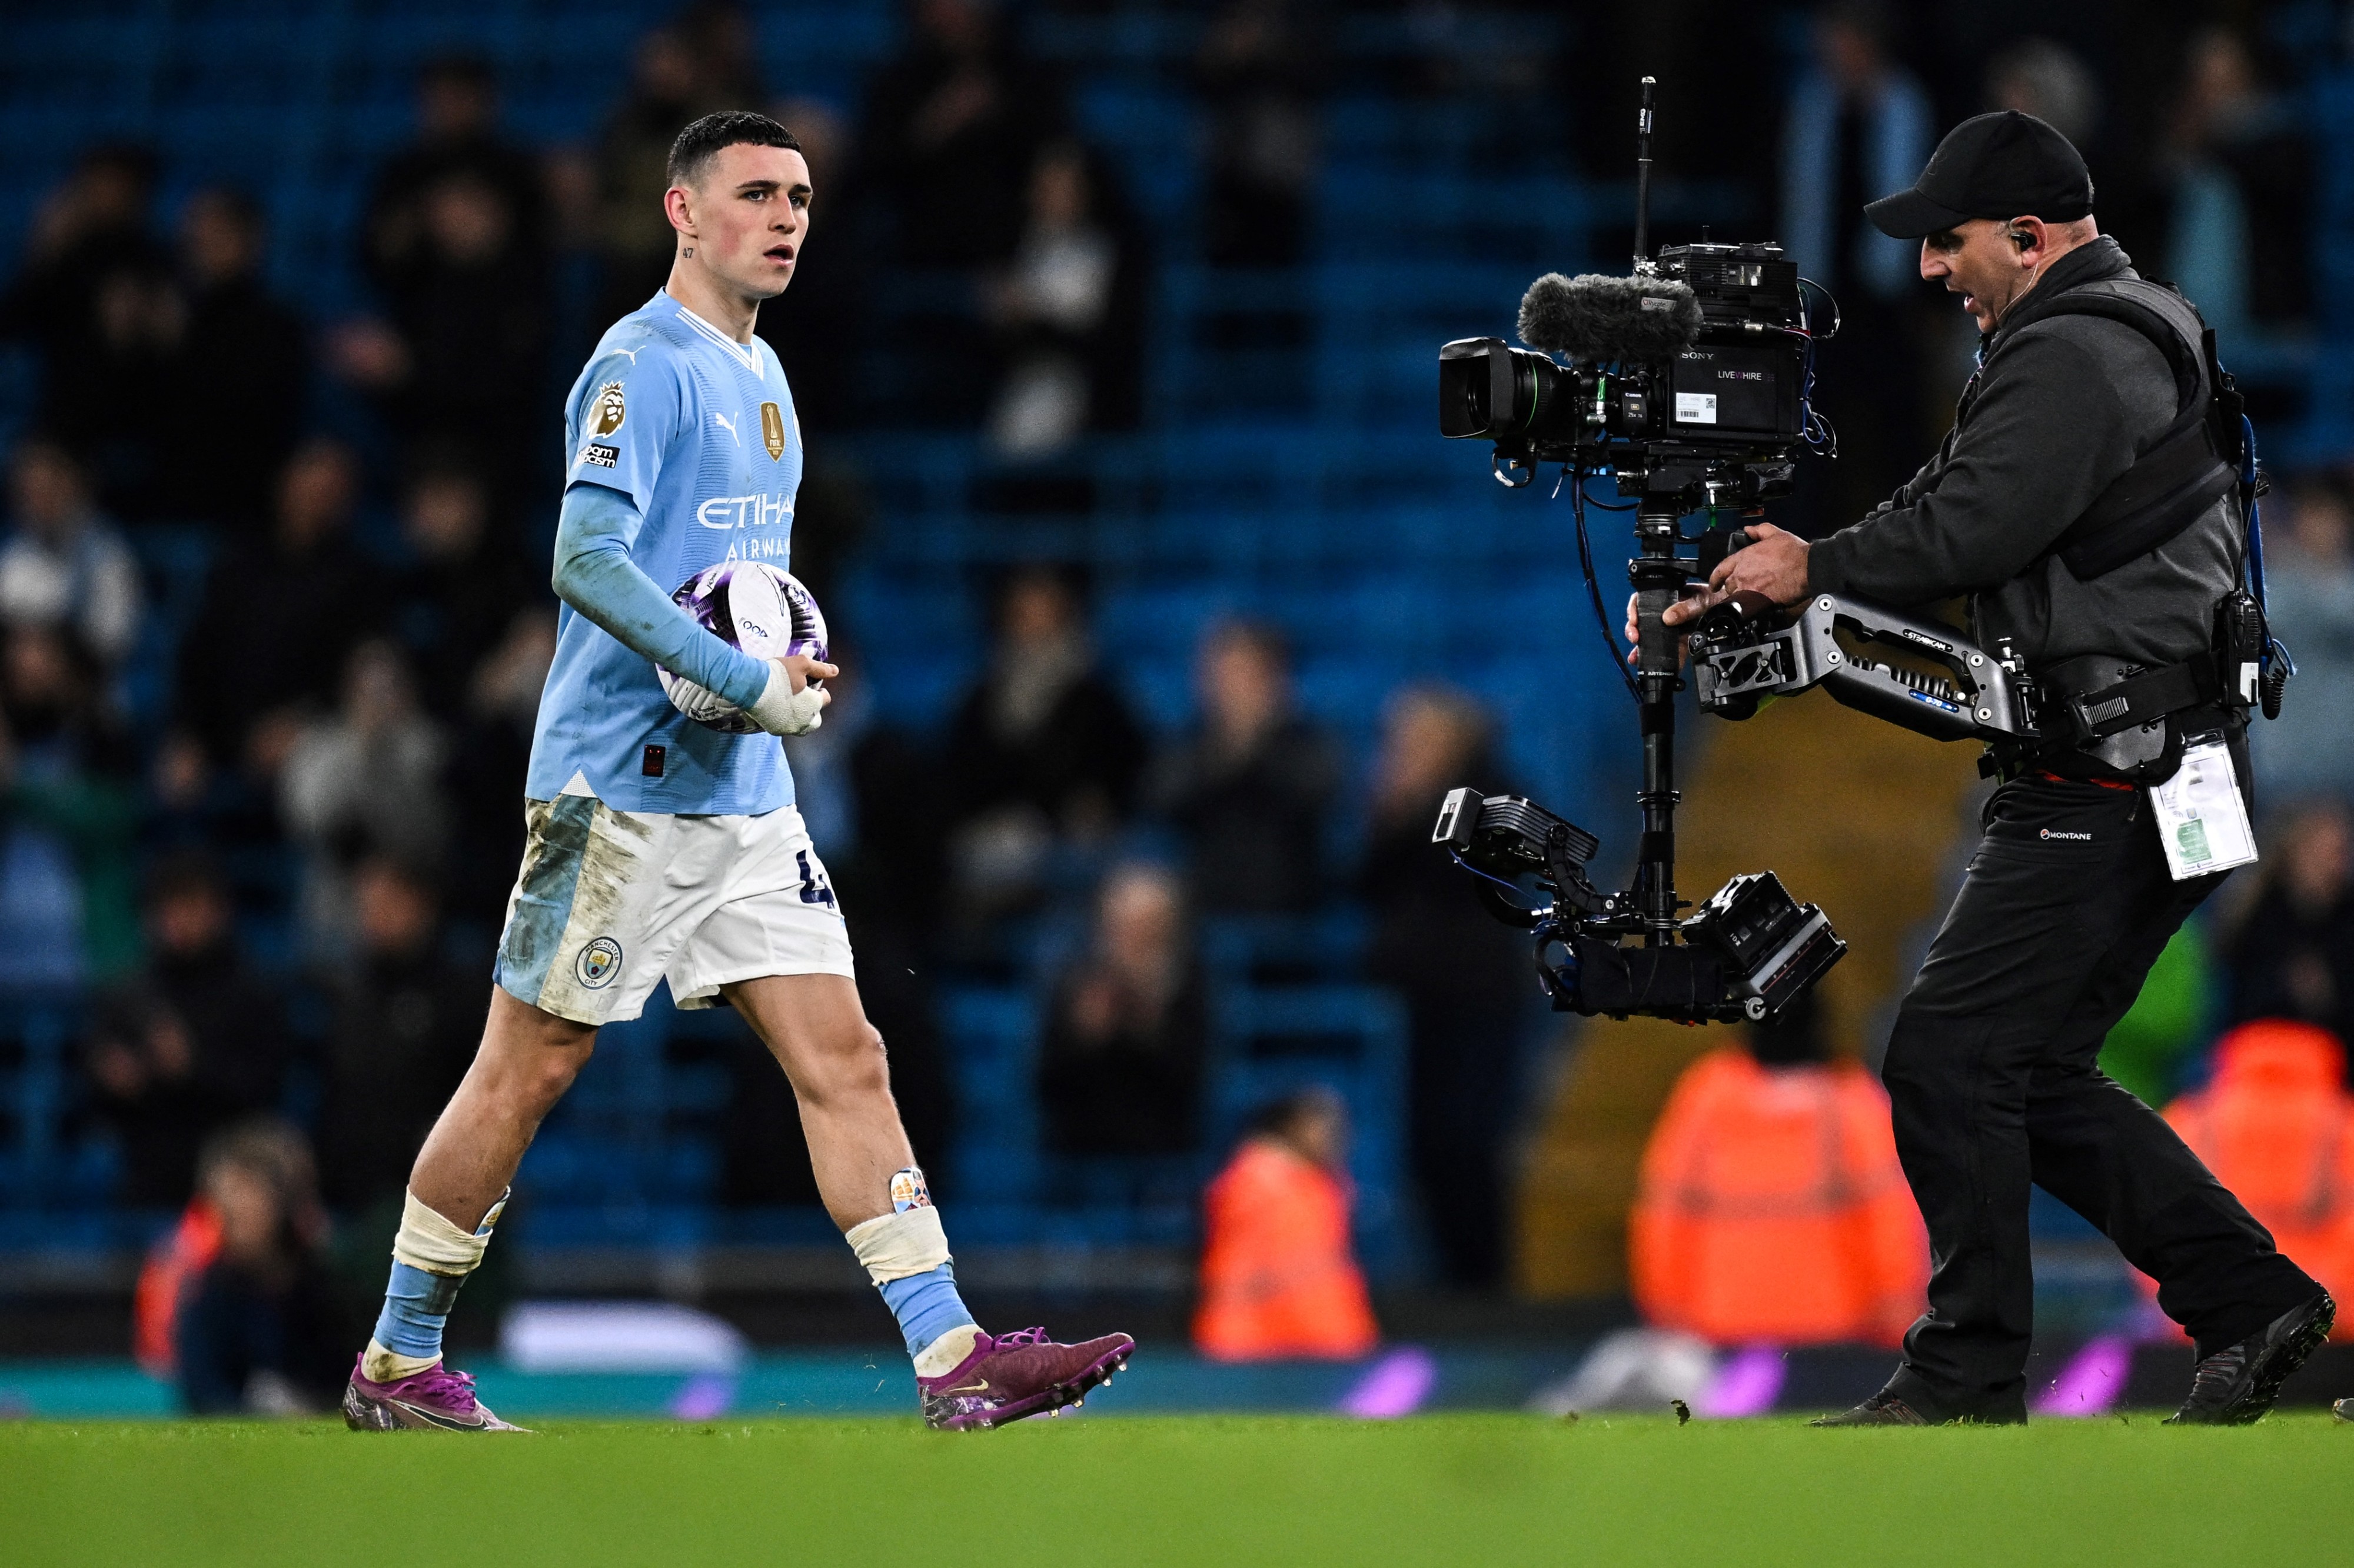 Manchester City star Phil Foden admits "there's a lot more to come" after 23-year-old picks up Football Writer's Player of The Year award